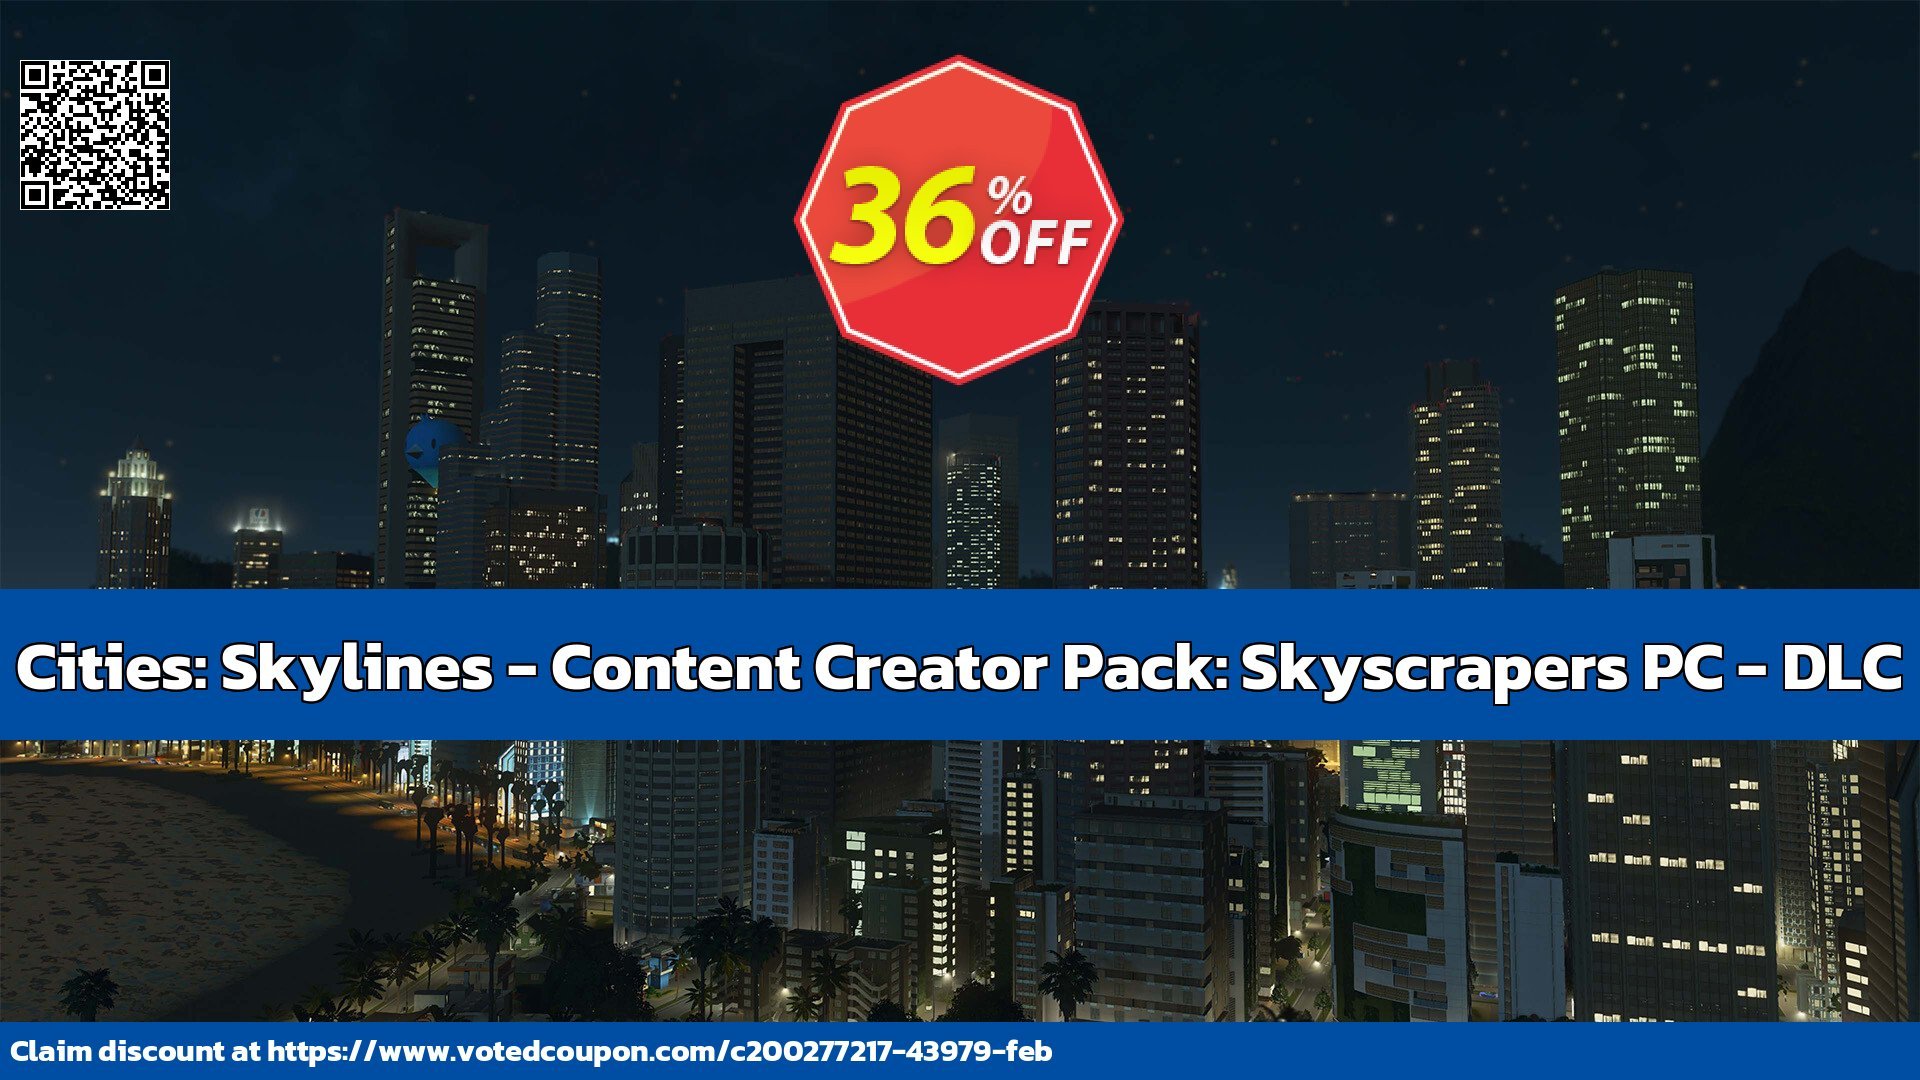 Cities: Skylines - Content Creator Pack: Skyscrapers PC - DLC Coupon Code May 2024, 44% OFF - VotedCoupon